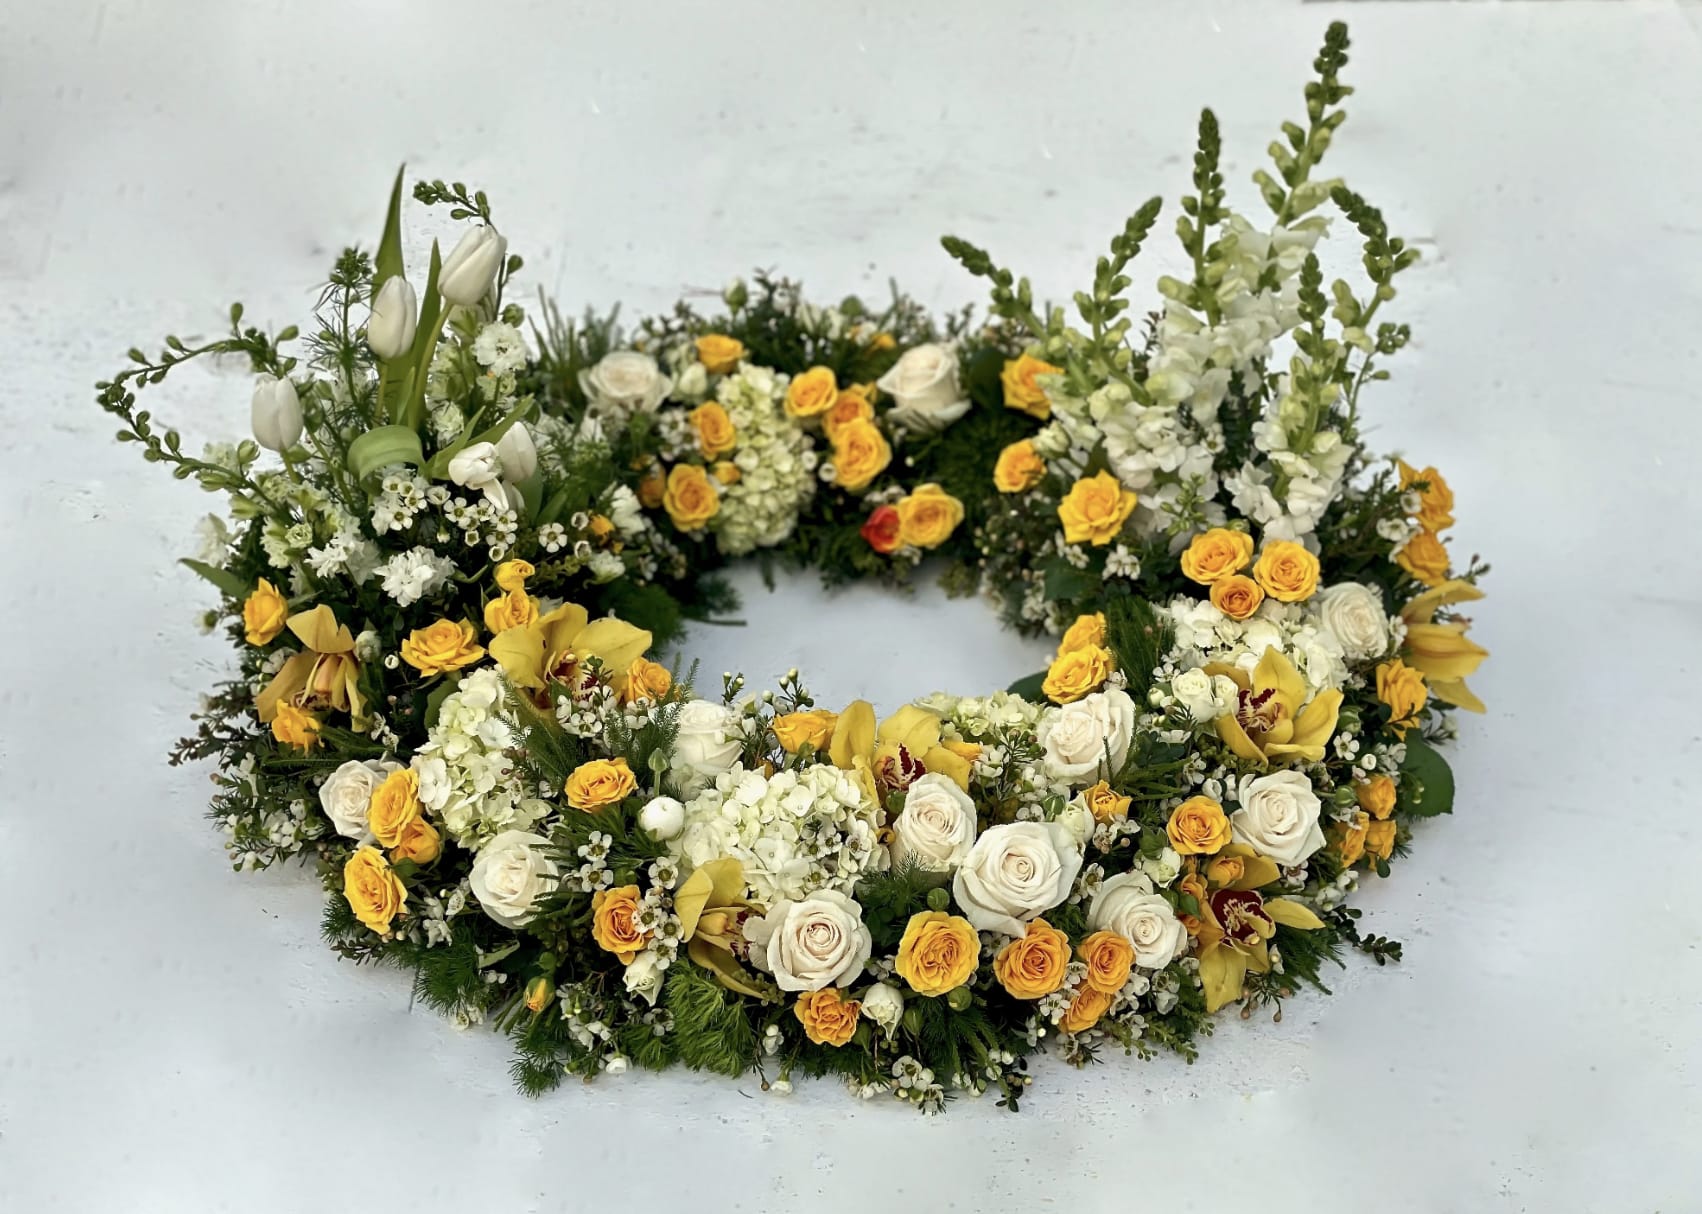 Urn Wreath in Yellows  - This urn tribute wreath includes a mix of flowers, roses, and seasonal greens. In the special instruction let us know what colors you would like. Standard size is 30'', deluxe is 36'' and premium is 42''. Interior diameter is about 10'' for standard size.